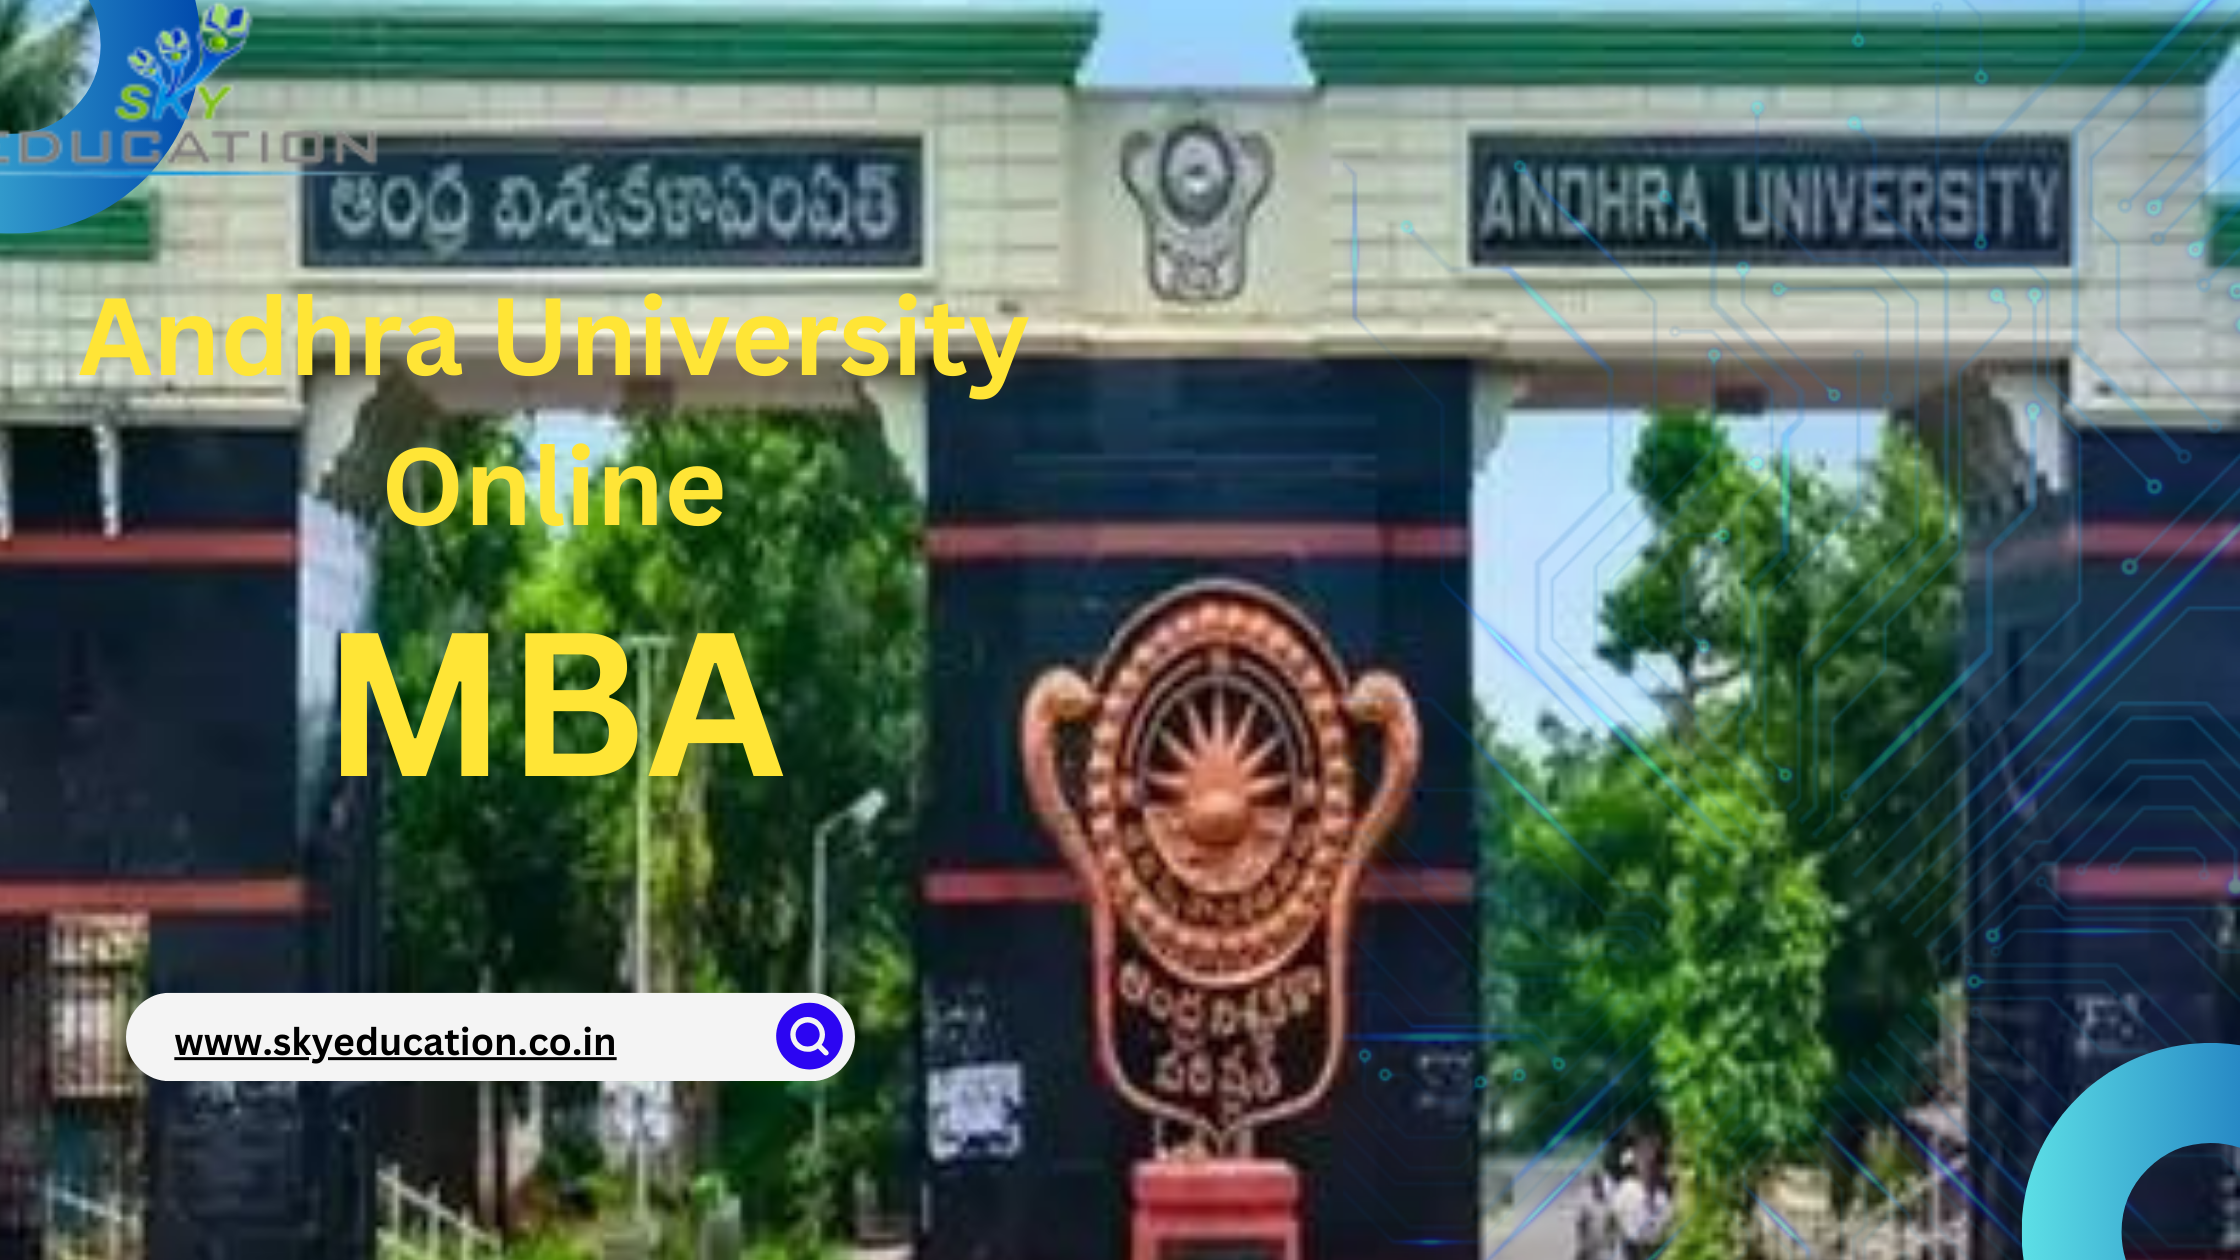 Andhra University Online MBA: Eligibility, Specializations, Fees, and FAQs